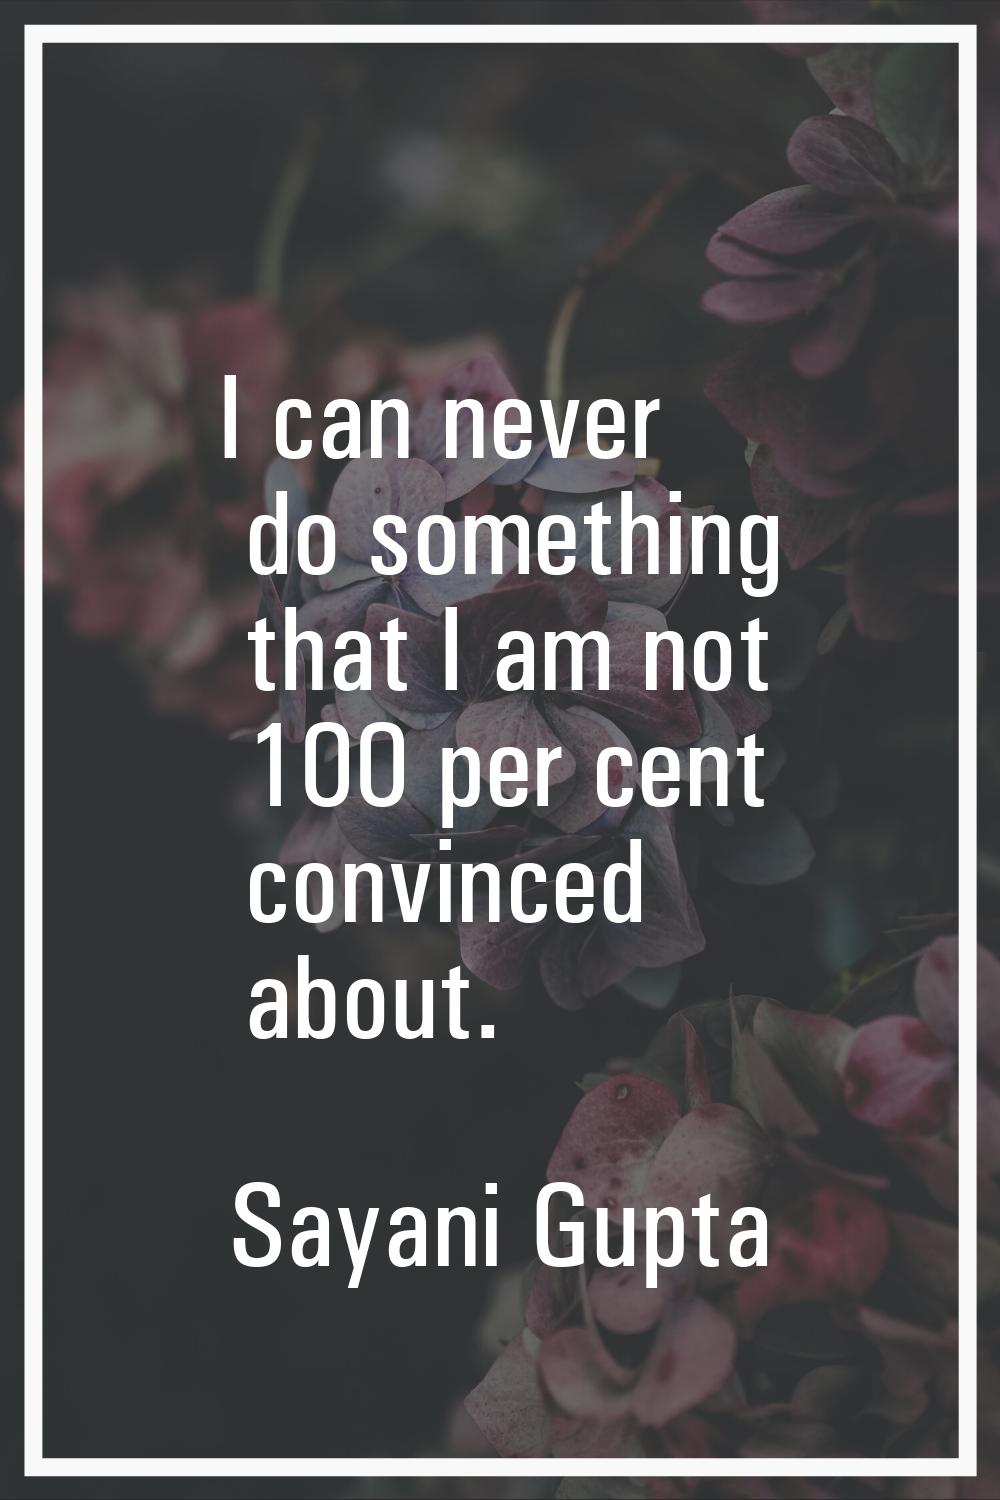 I can never do something that I am not 100 per cent convinced about.